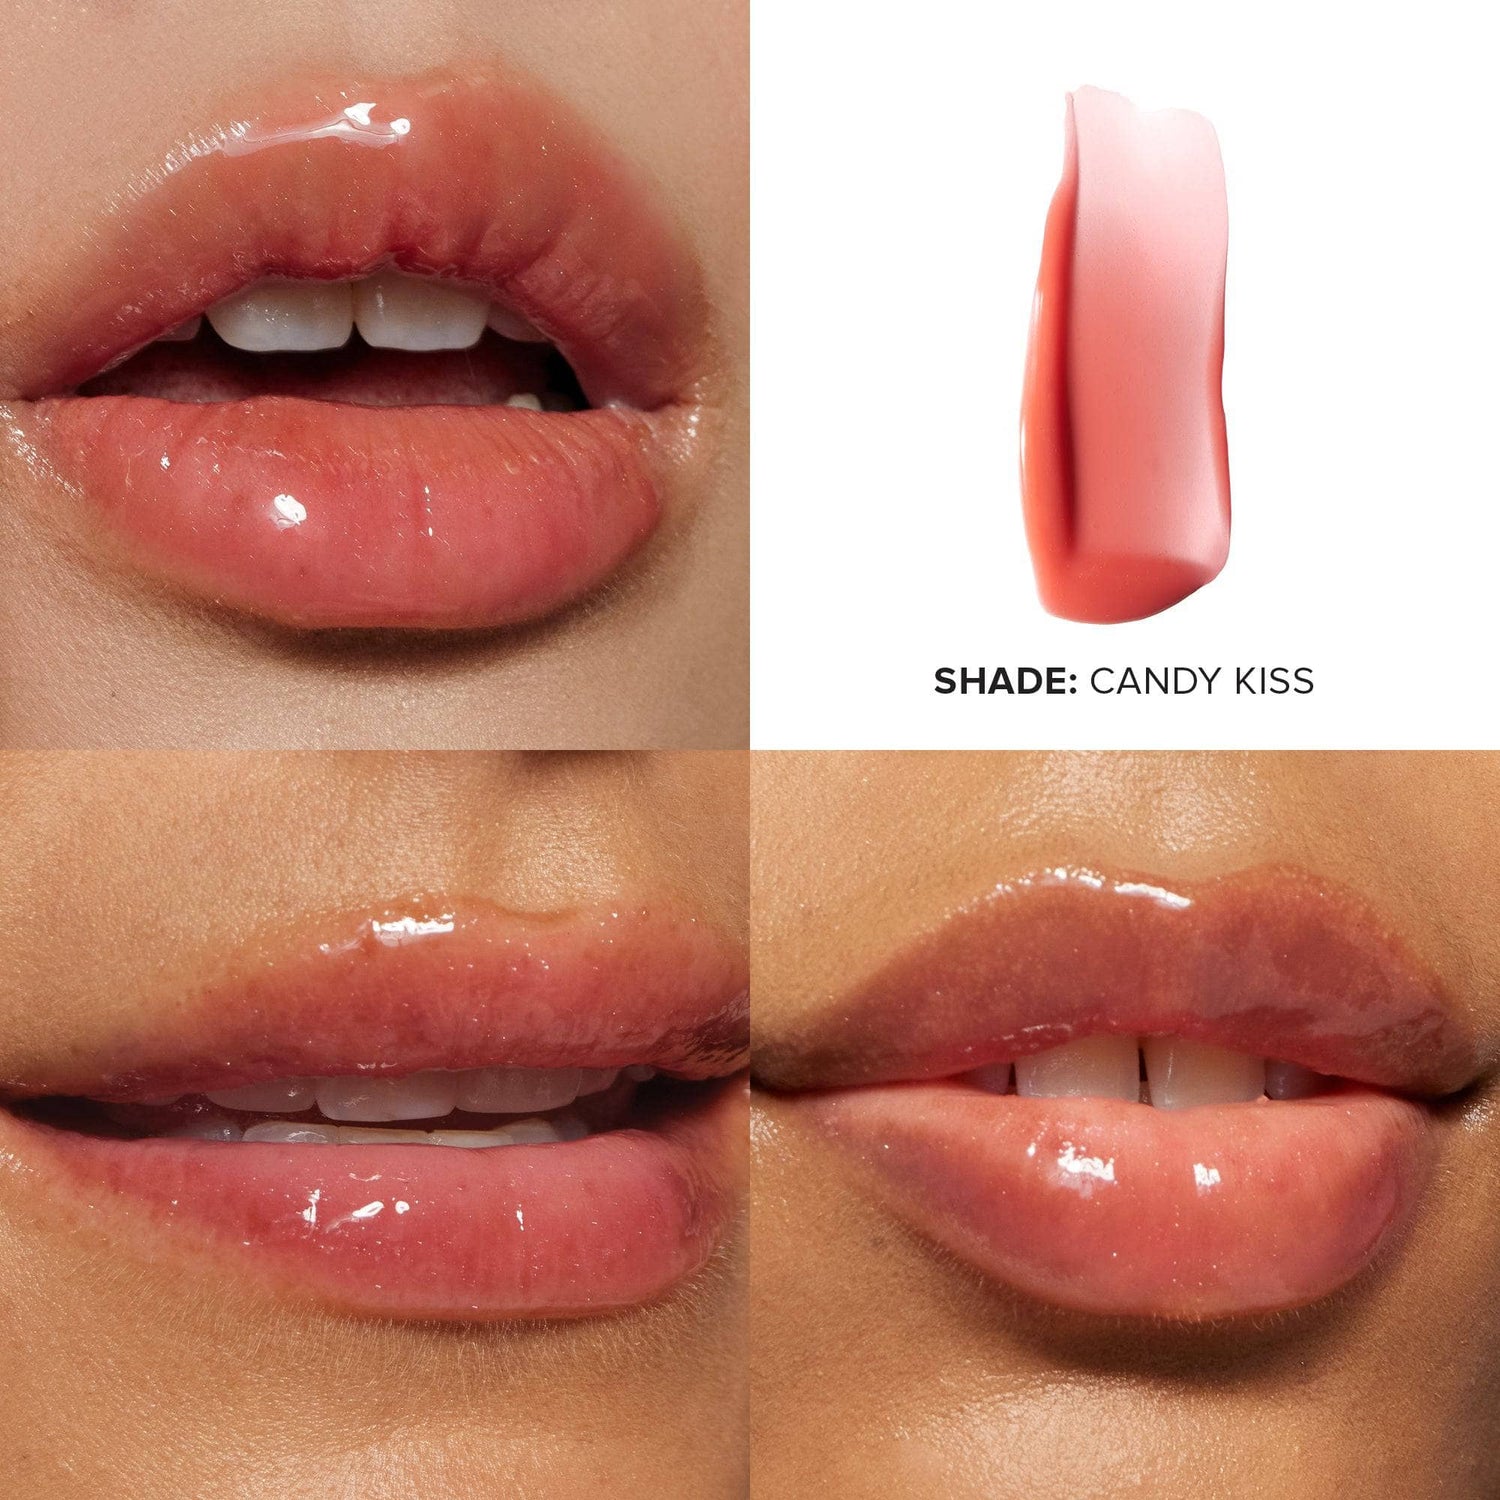 Three sets of lips wearing Hydra Peptide Lip Butter Tint in shade Candy Kiss